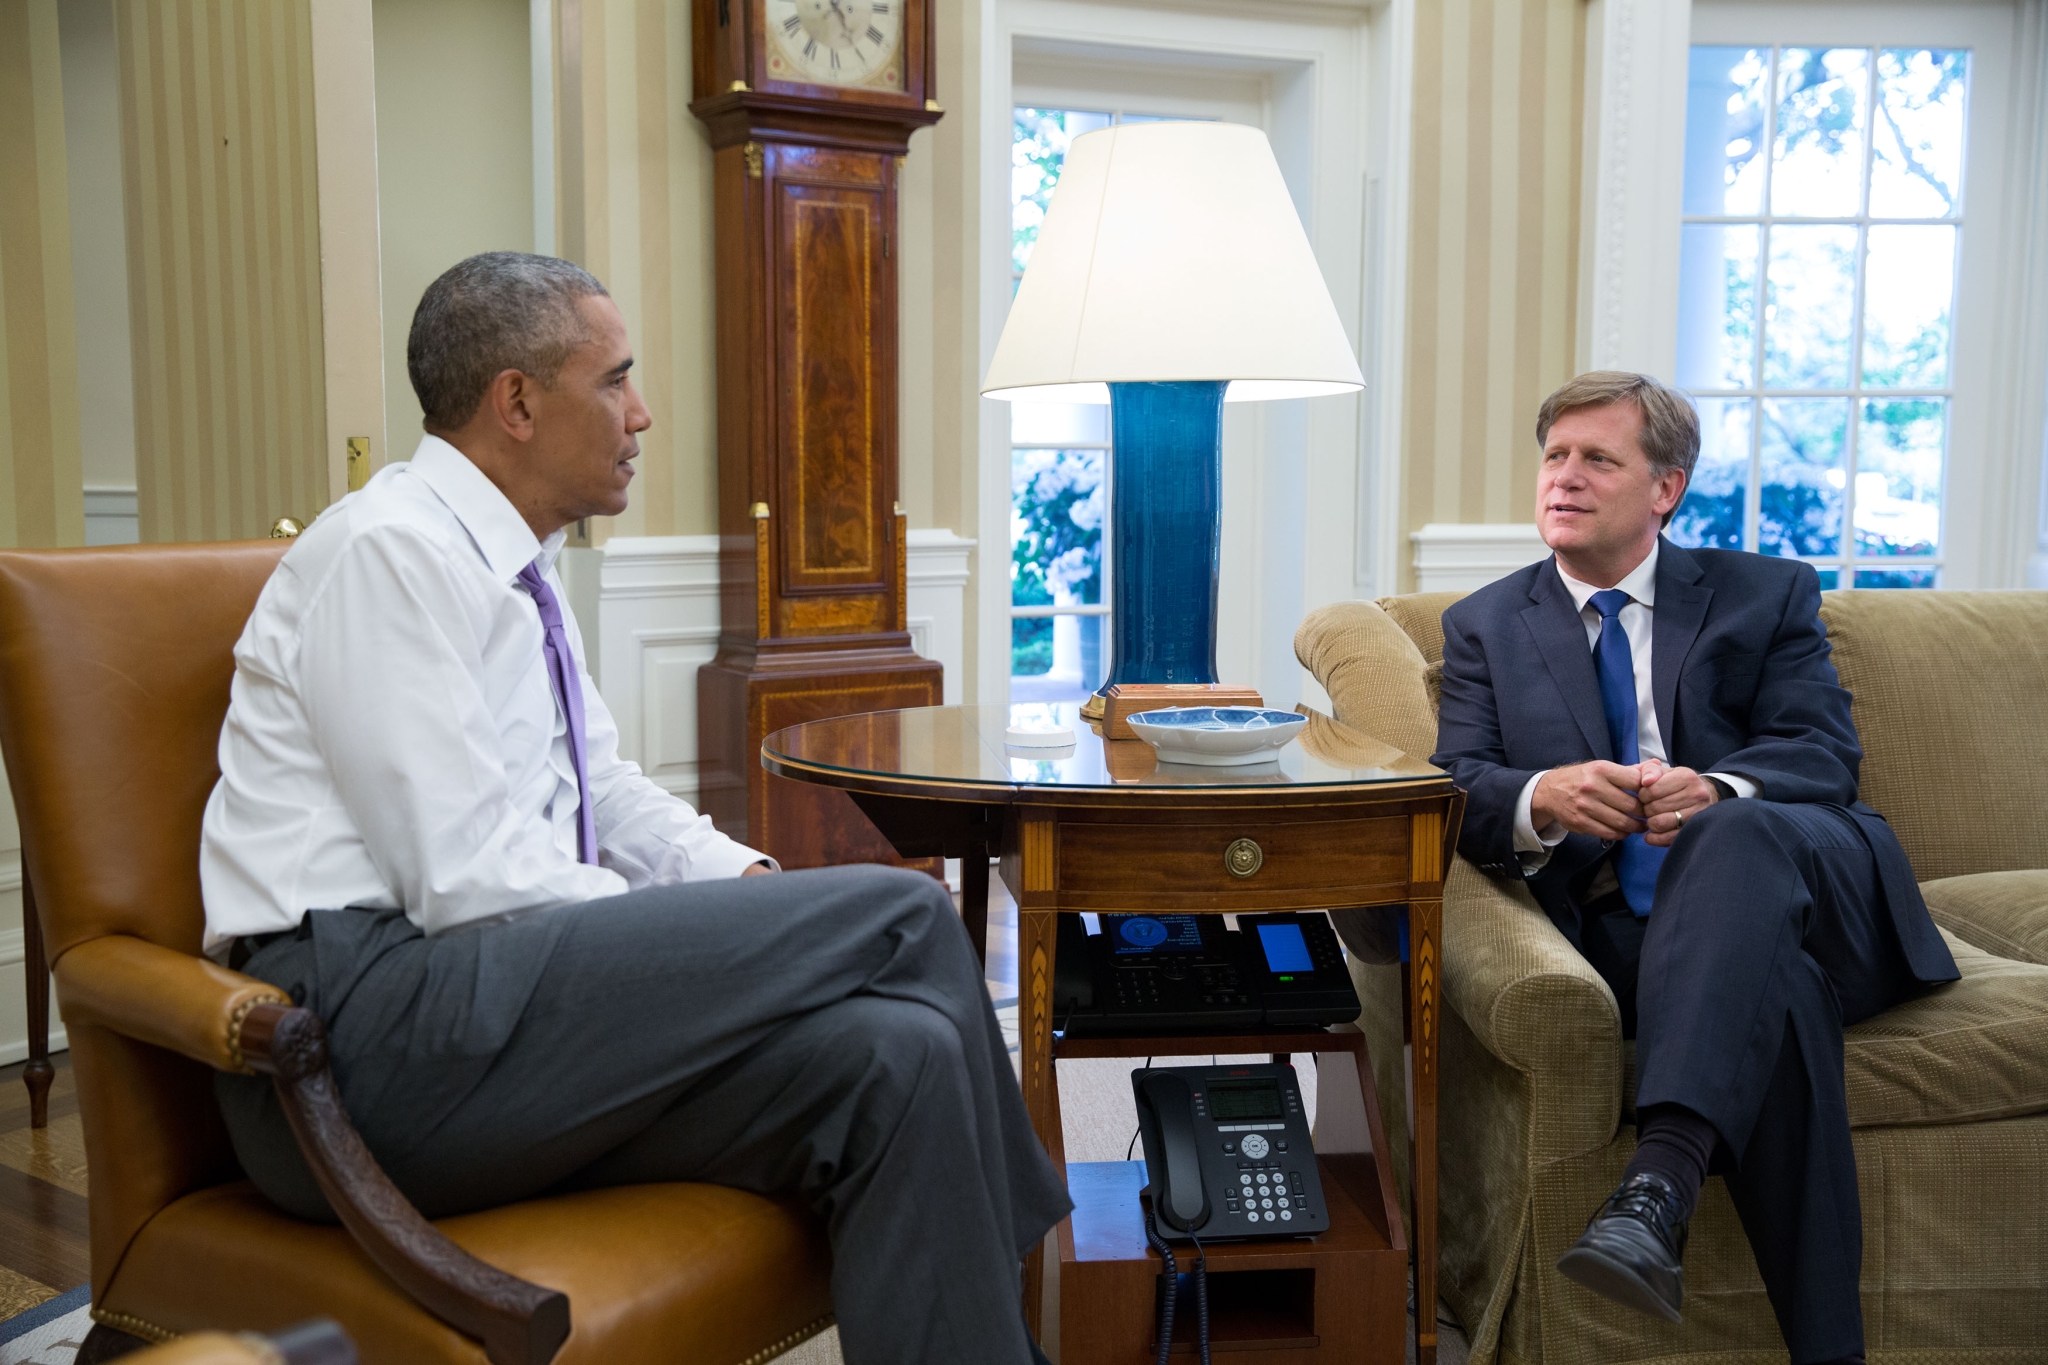 President Barack Obama meets with Mike McFaul in the Oval Office, June 10, 2016. (Official White House Photo by Pete Souza)